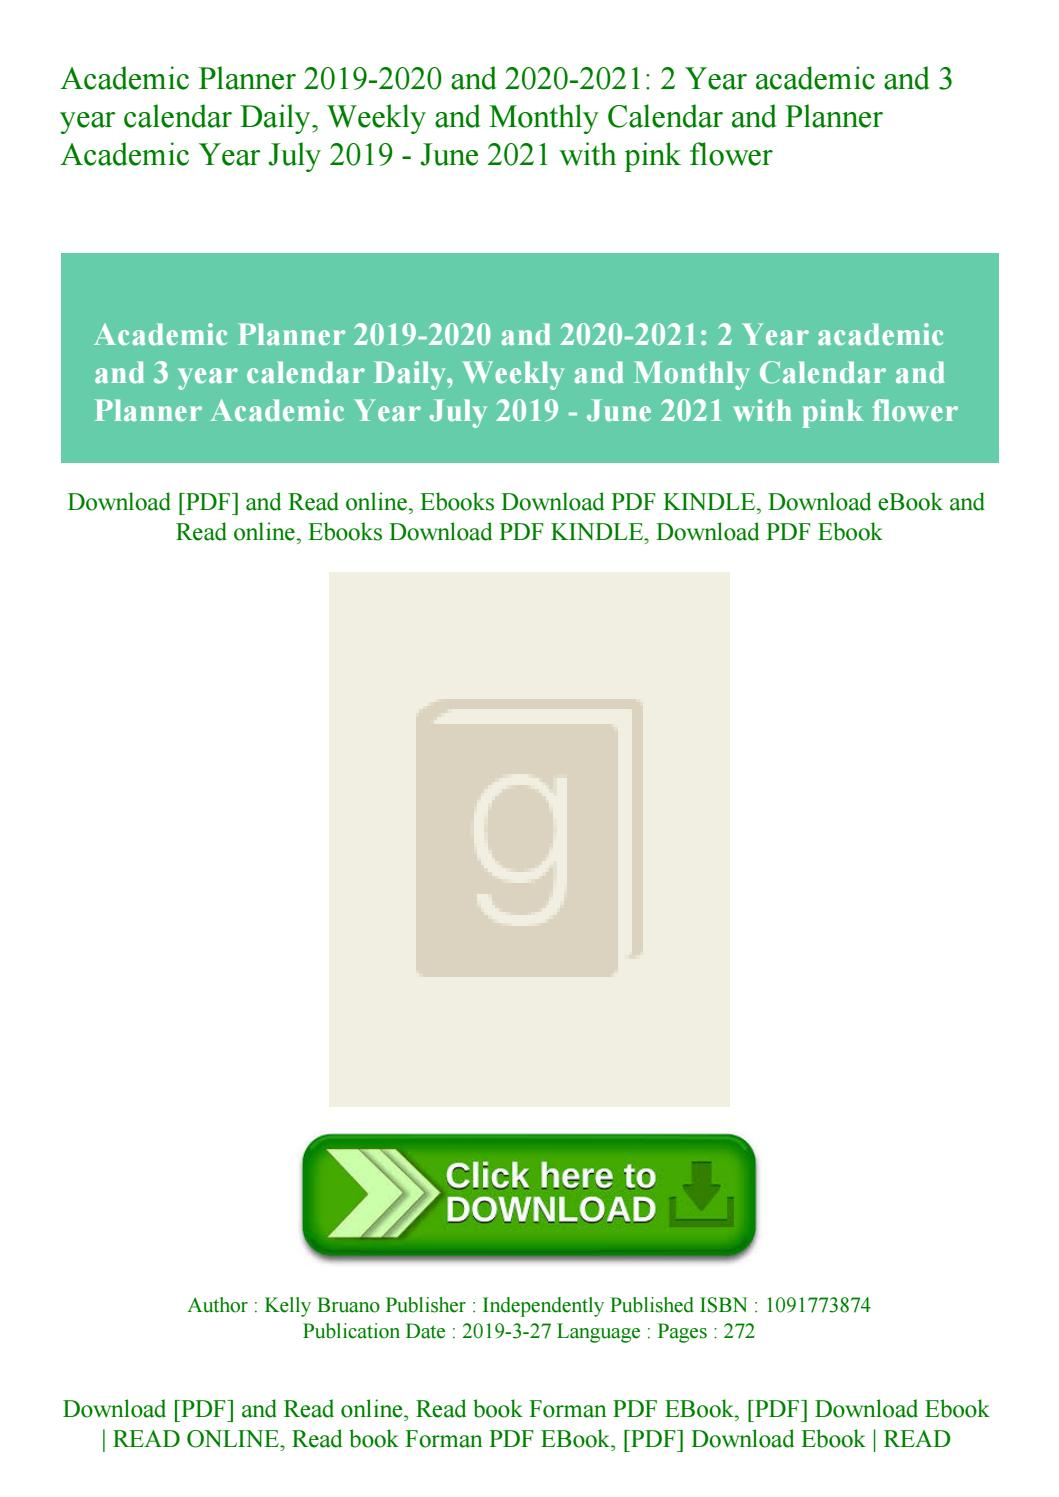 Academic Planner 2019-2020 And 2020-2021 2 Year Academic And